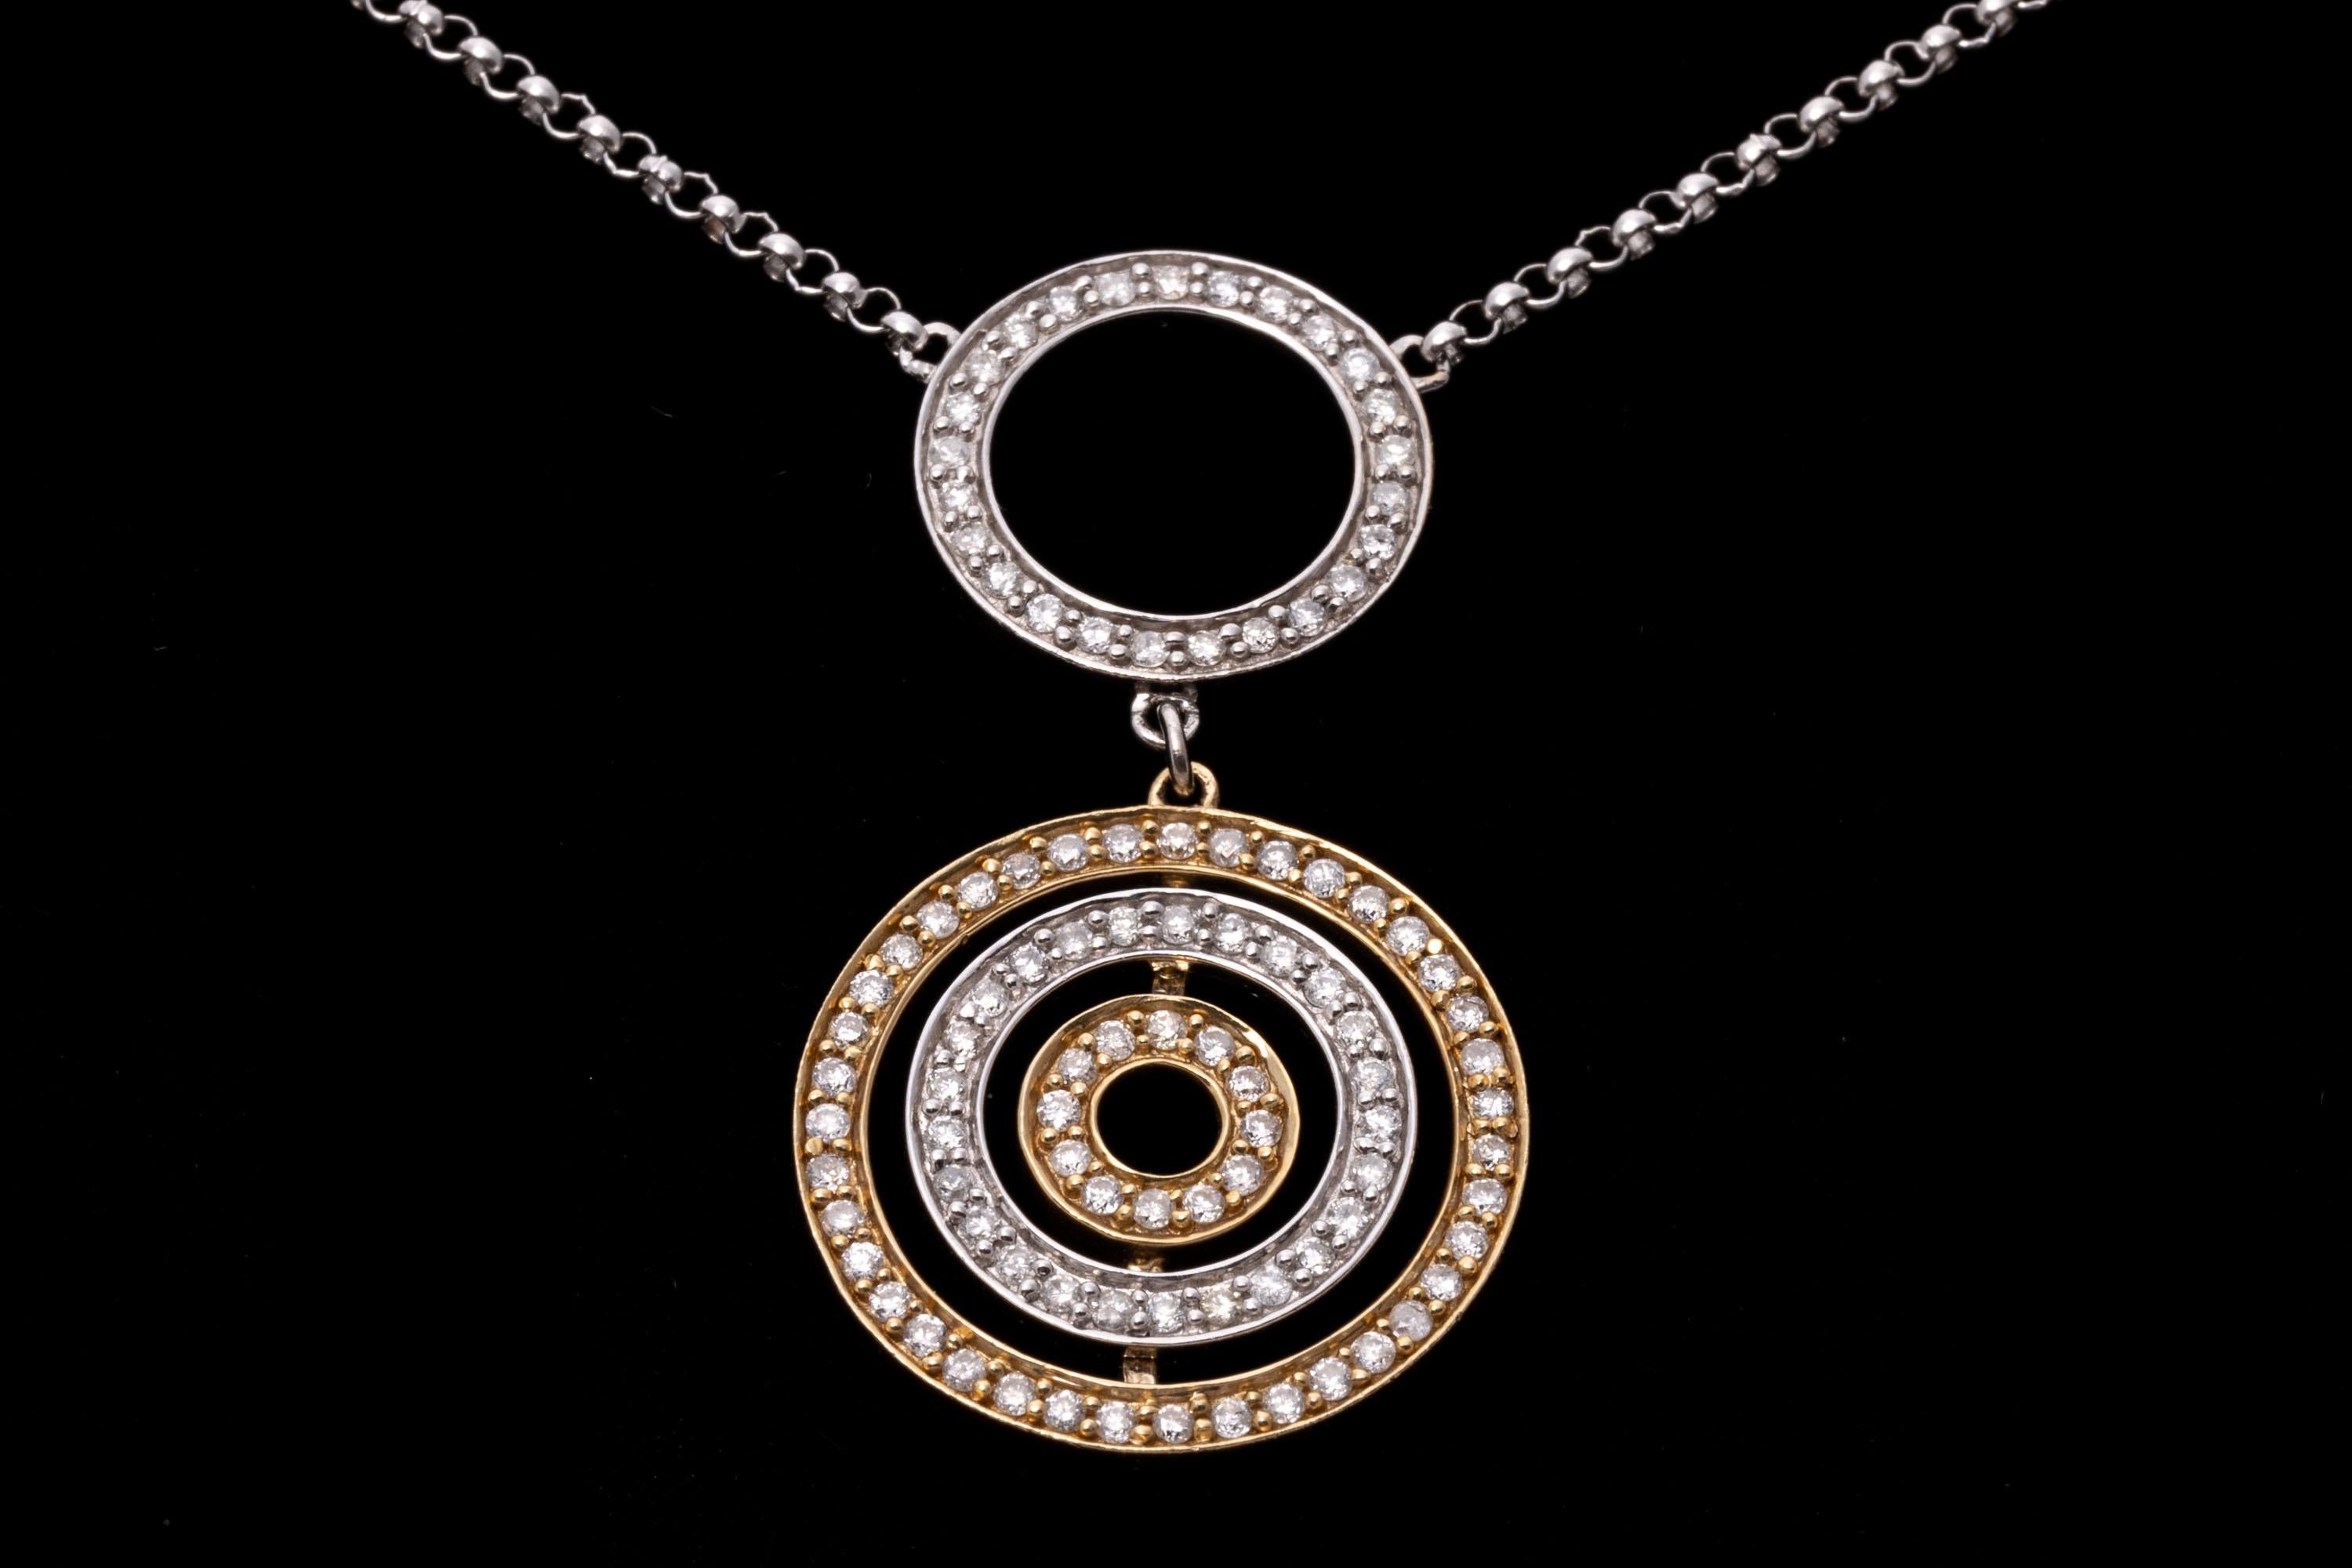 14k white and yellow gold necklace. This fun, contemporary necklace contains a curb link chain featuring two small open circle stations, set with round faceted diamonds, prong set. In the center is a larger open circle, with an articulated drop